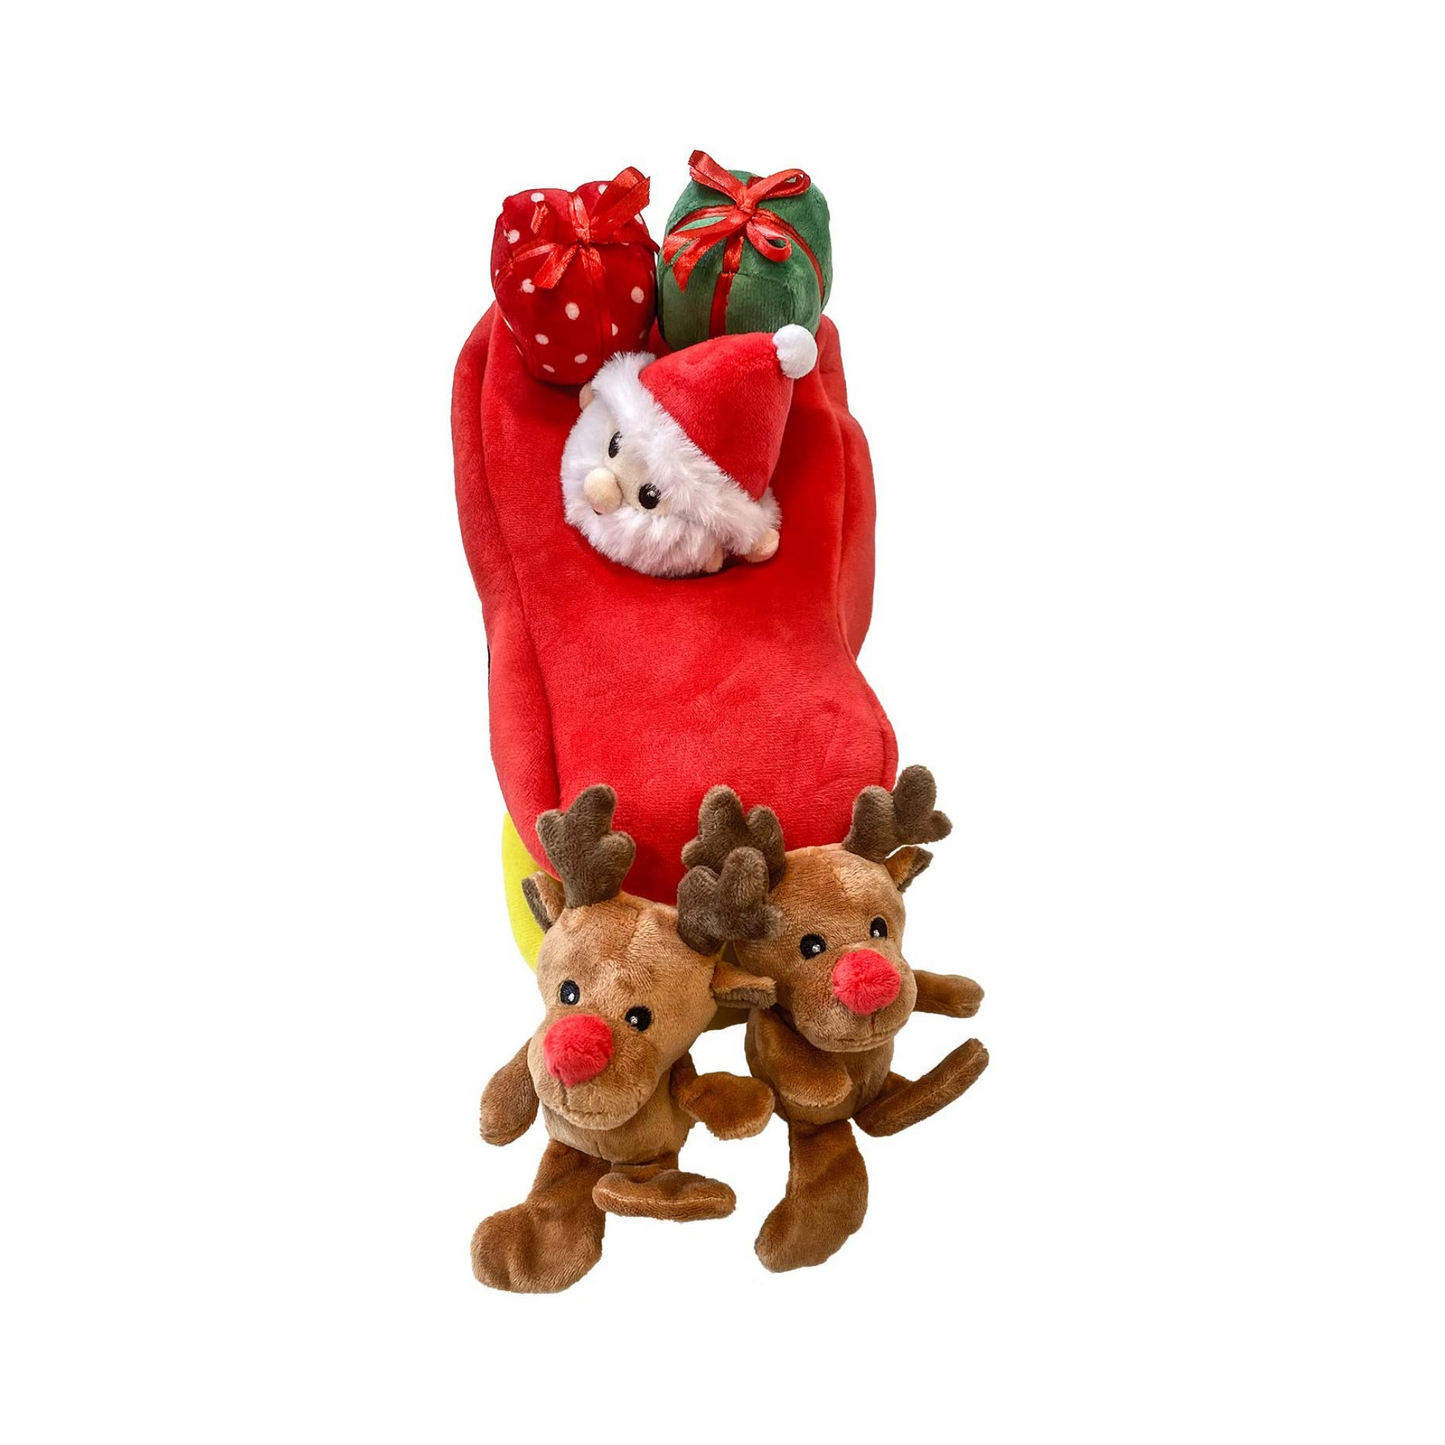 Midlee Santa Sleigh Find a Toy Christmas Dog Toy- Plush Burrow Interactive Hide & Seek Pet Holiday Toy